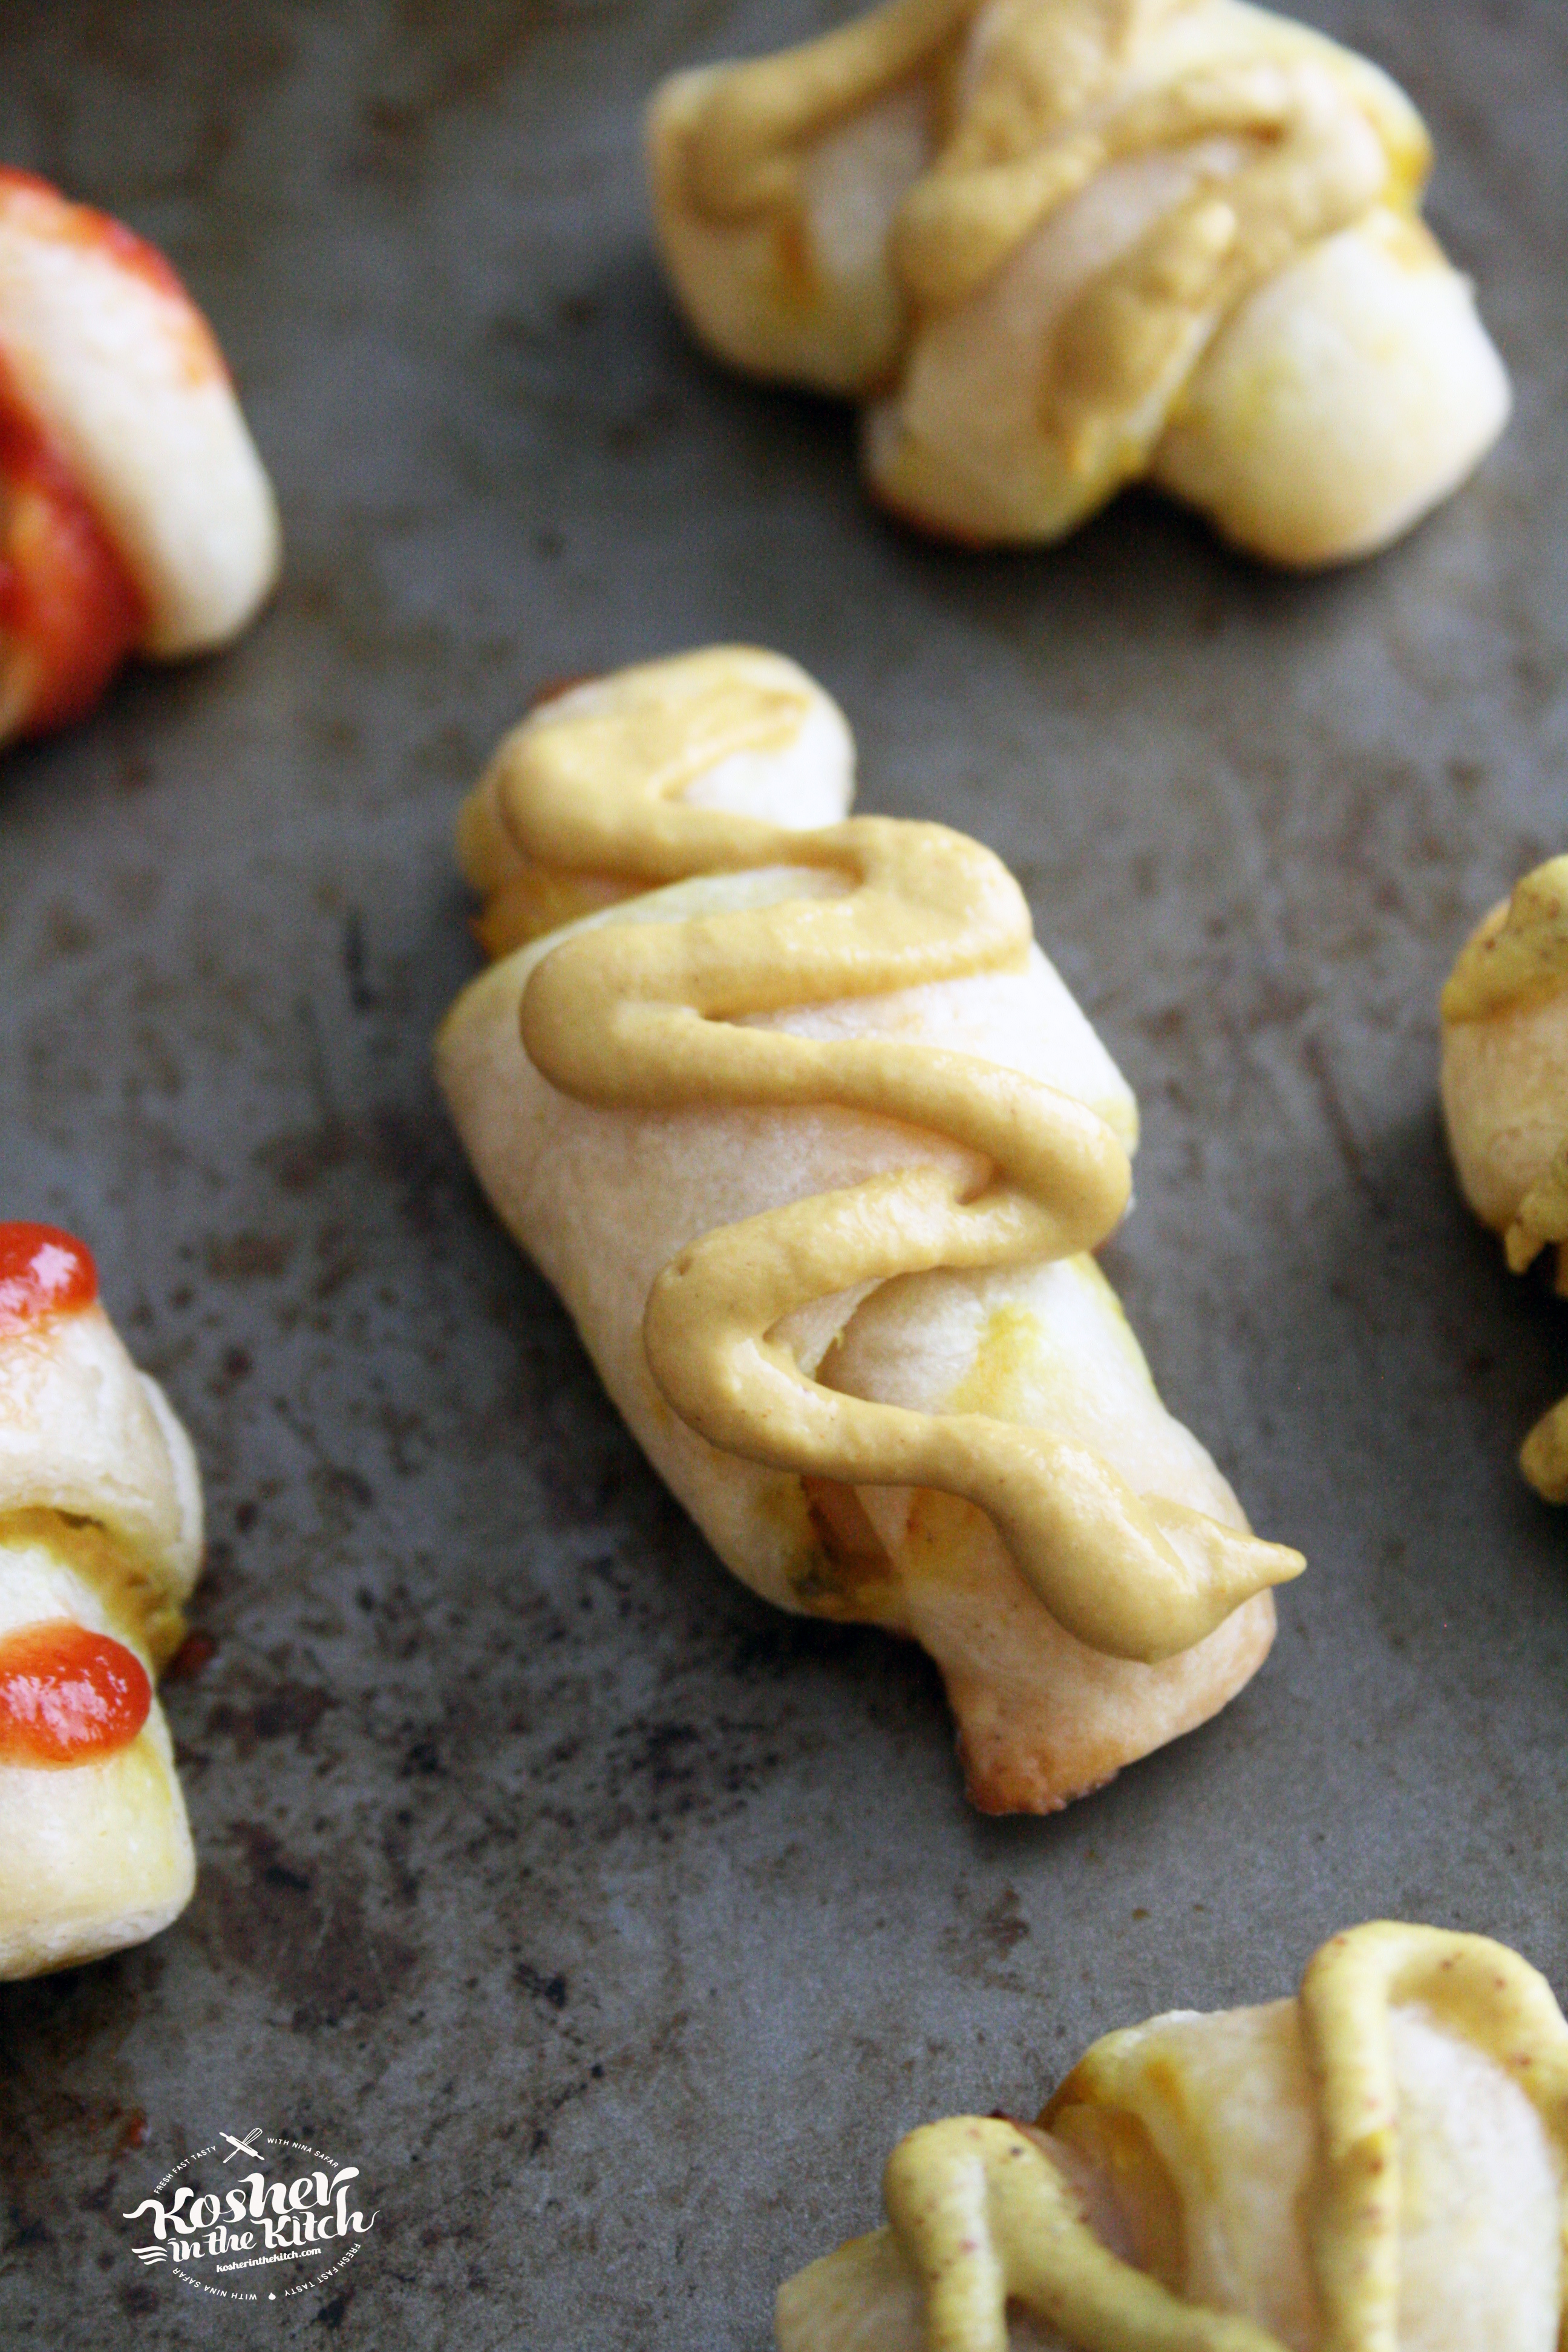 Top baked rugelach with mustard